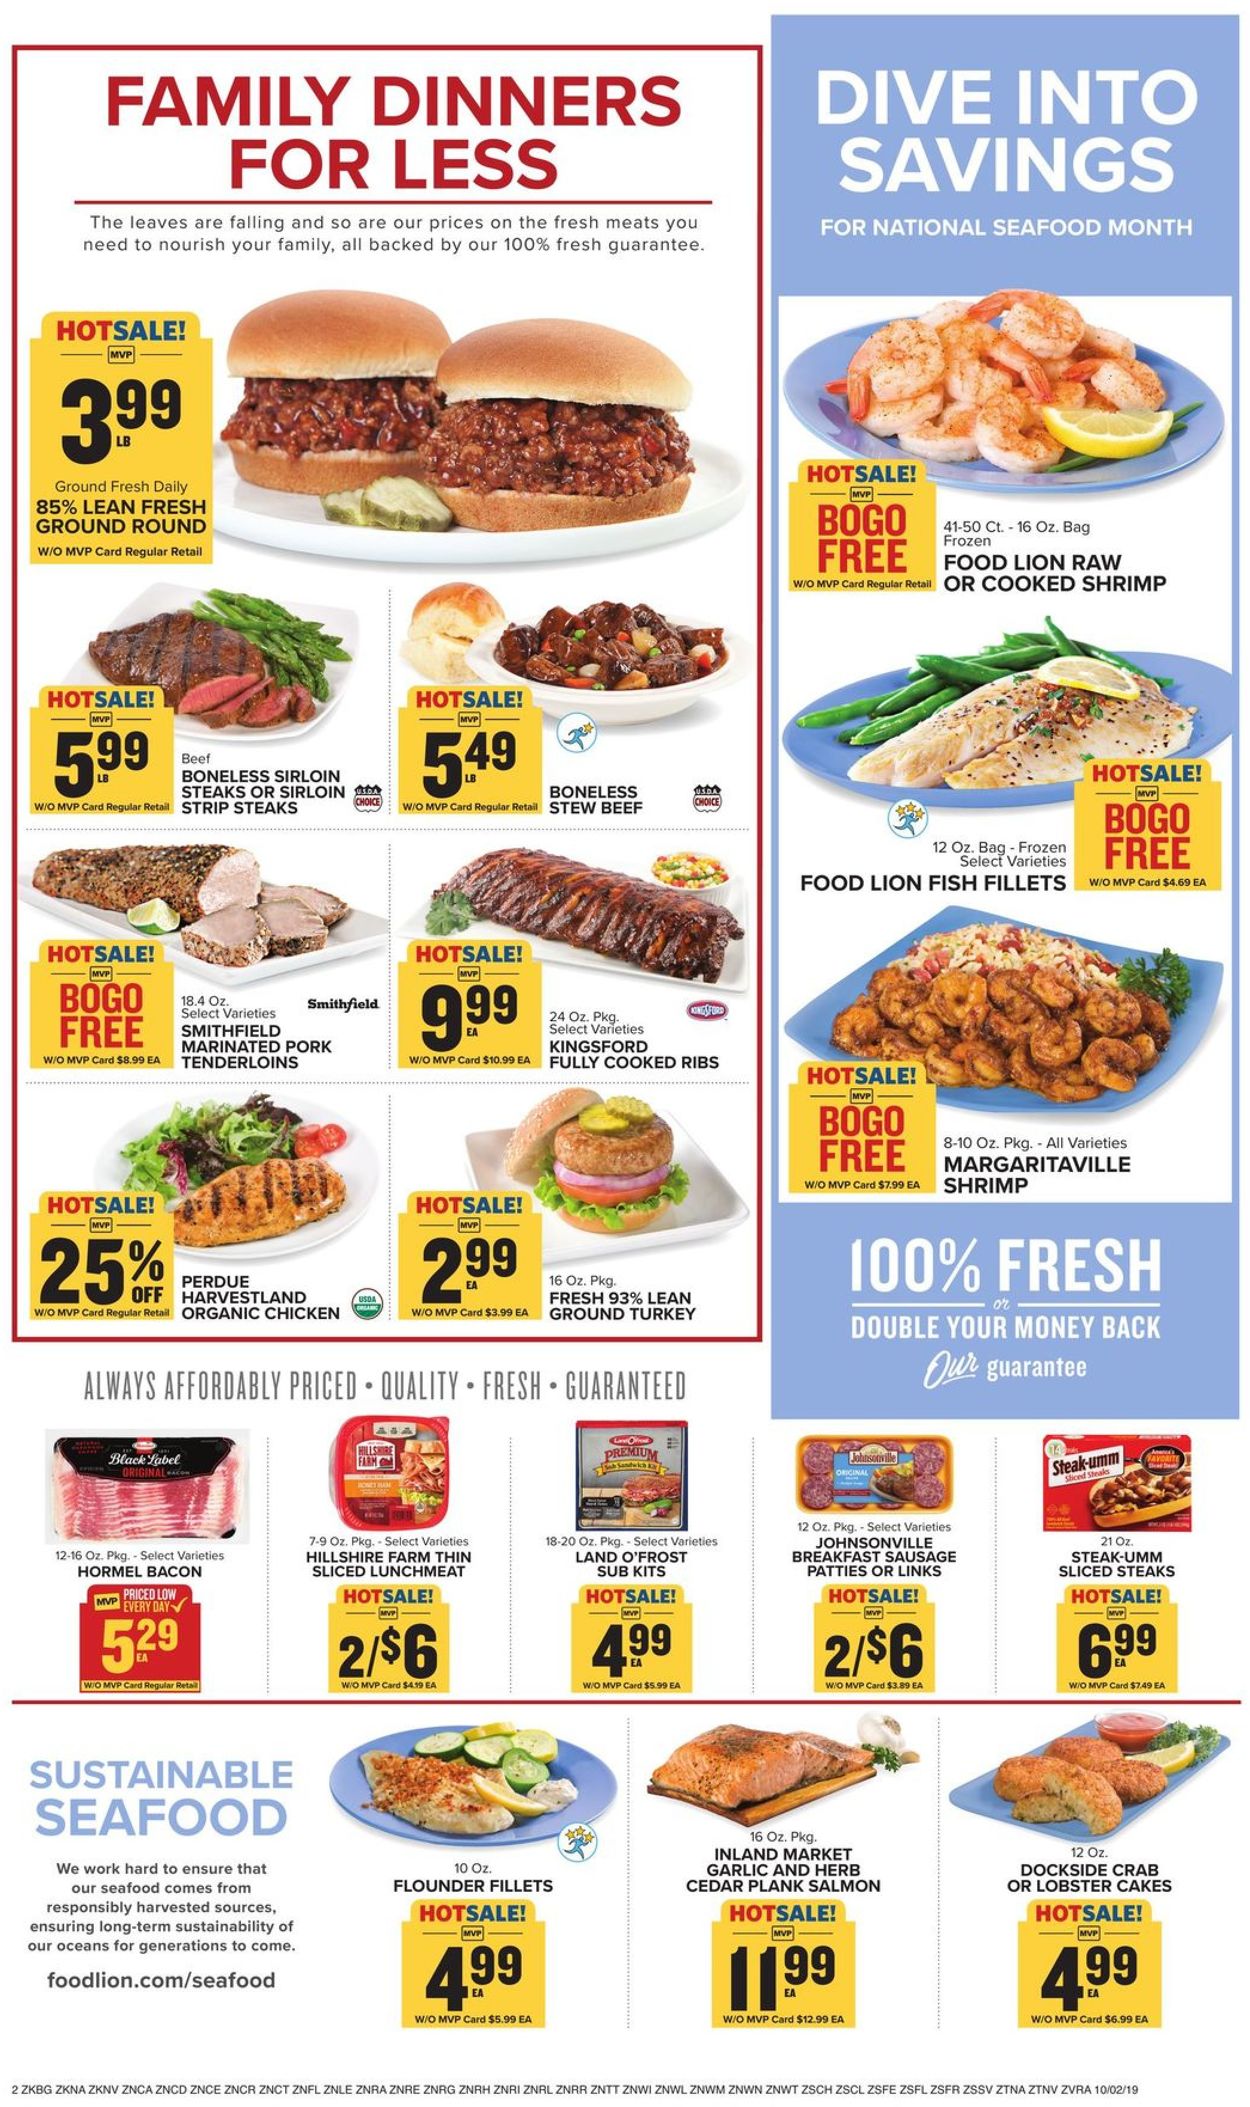 Food Lion Current weekly ad 10/02 - 10/08/2019 [3] - frequent-ads.com